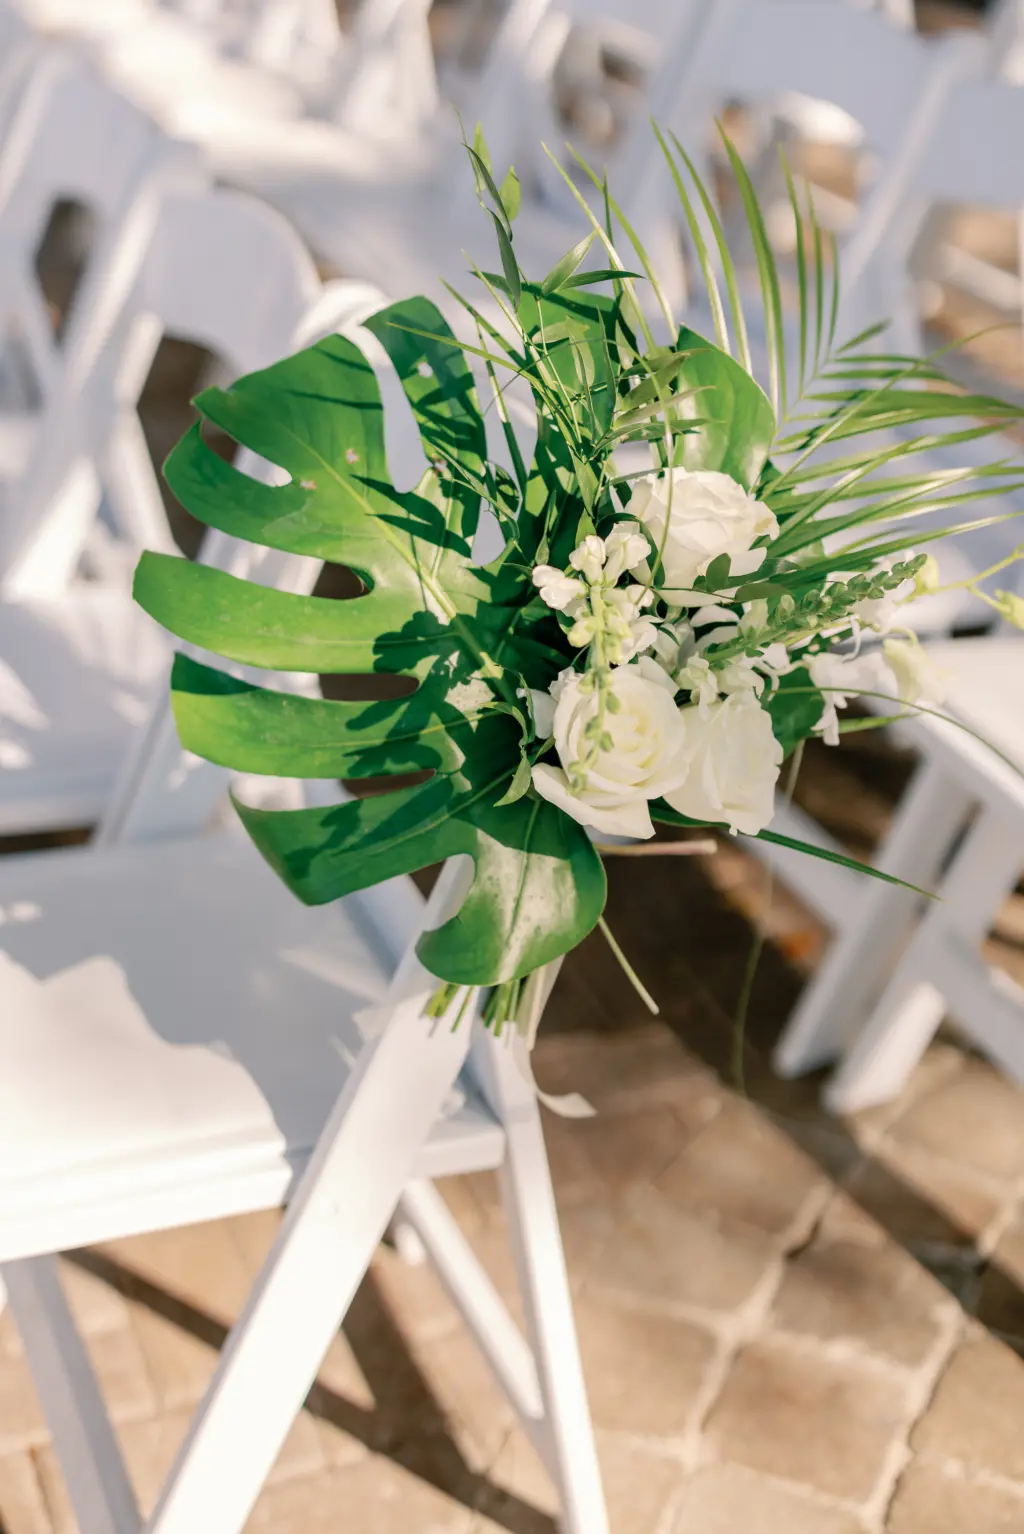 White Floral Monstera Leaf Tropical Wedding Ceremony Decor Ideas on White Folding Chairs